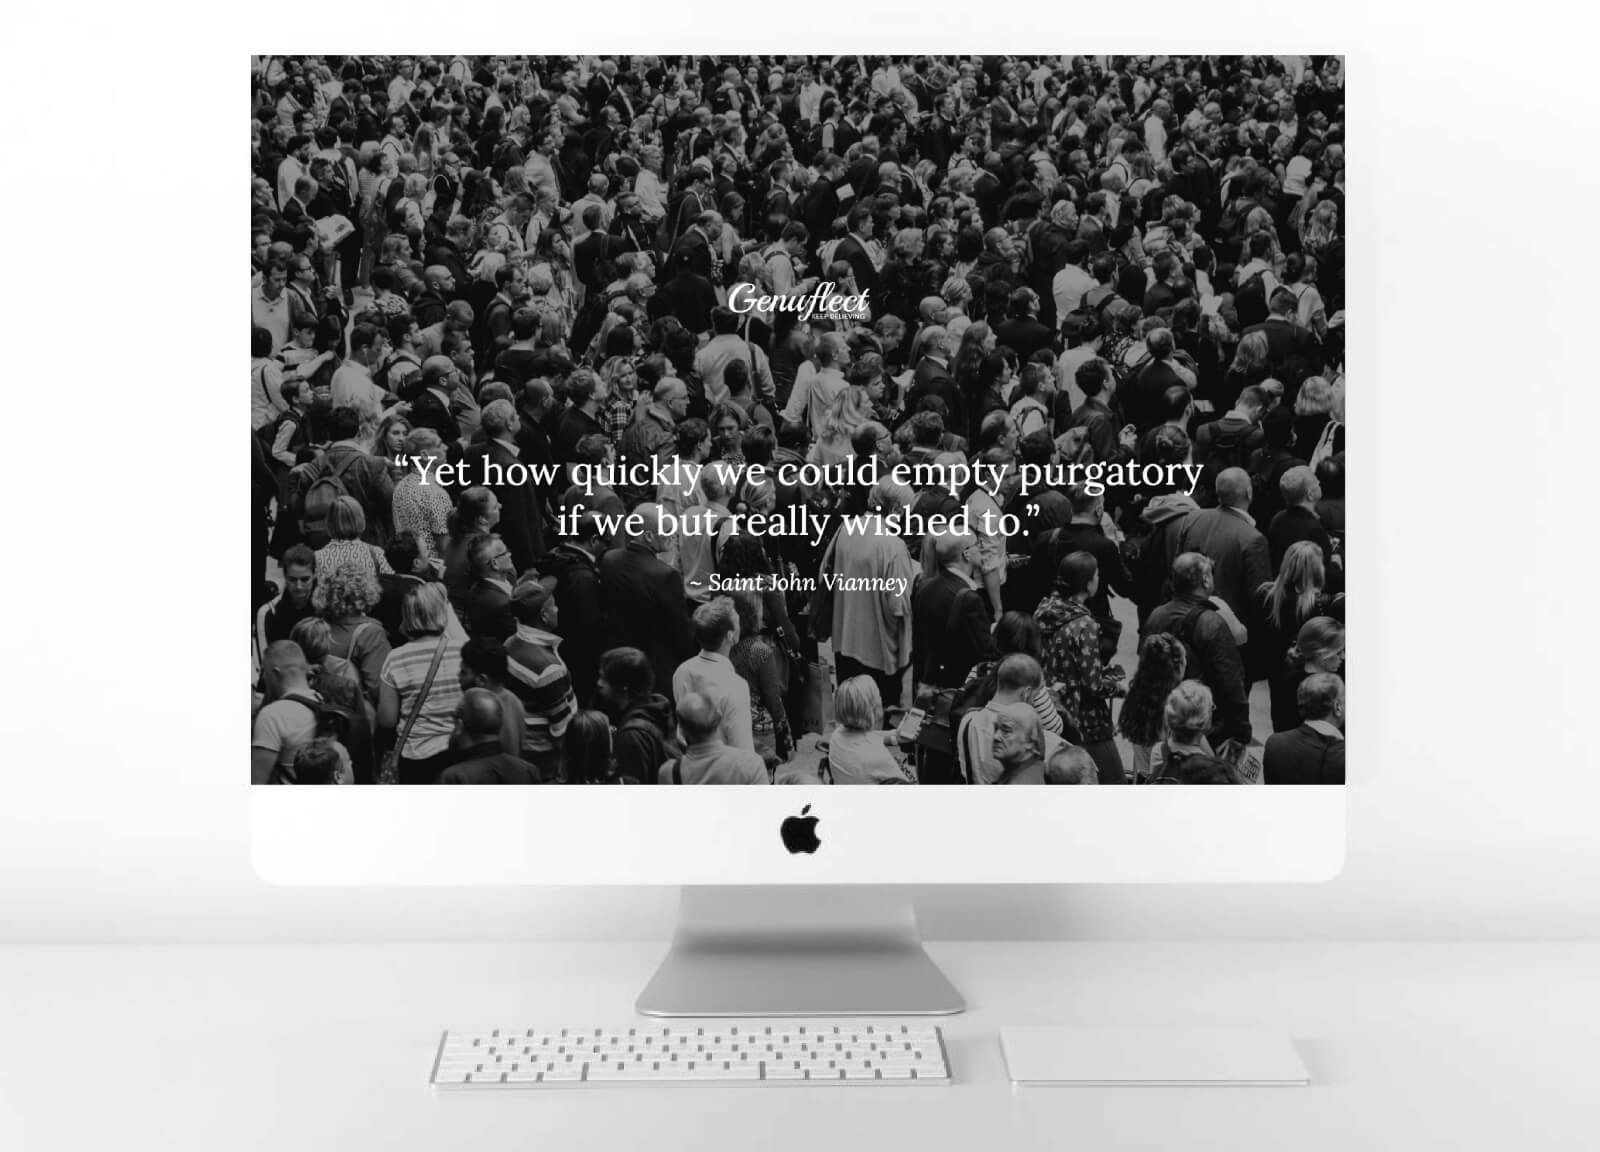 Genuflect computer background of a black and white image of a crowded group of men and women standing